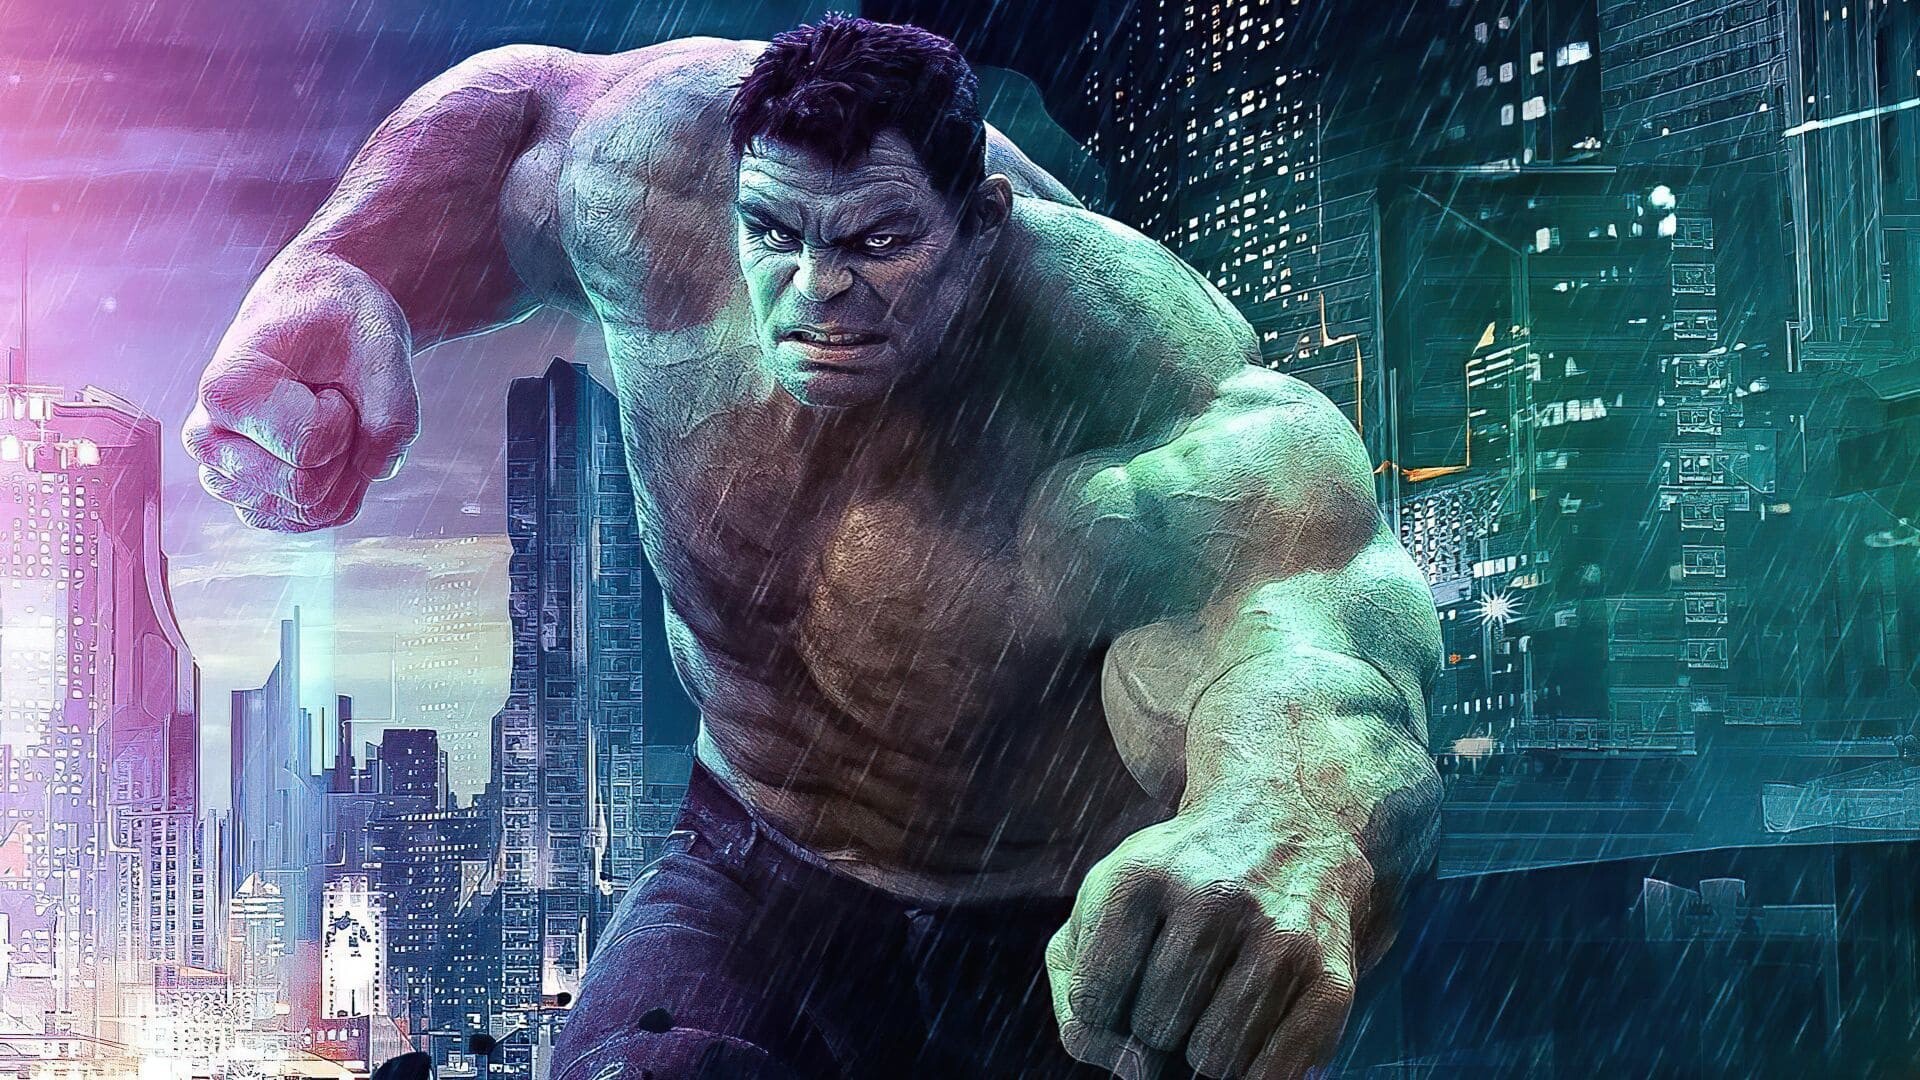 Hulk: One of the most iconic characters in popular culture, Marvel Comics. 1920x1080 Full HD Wallpaper.